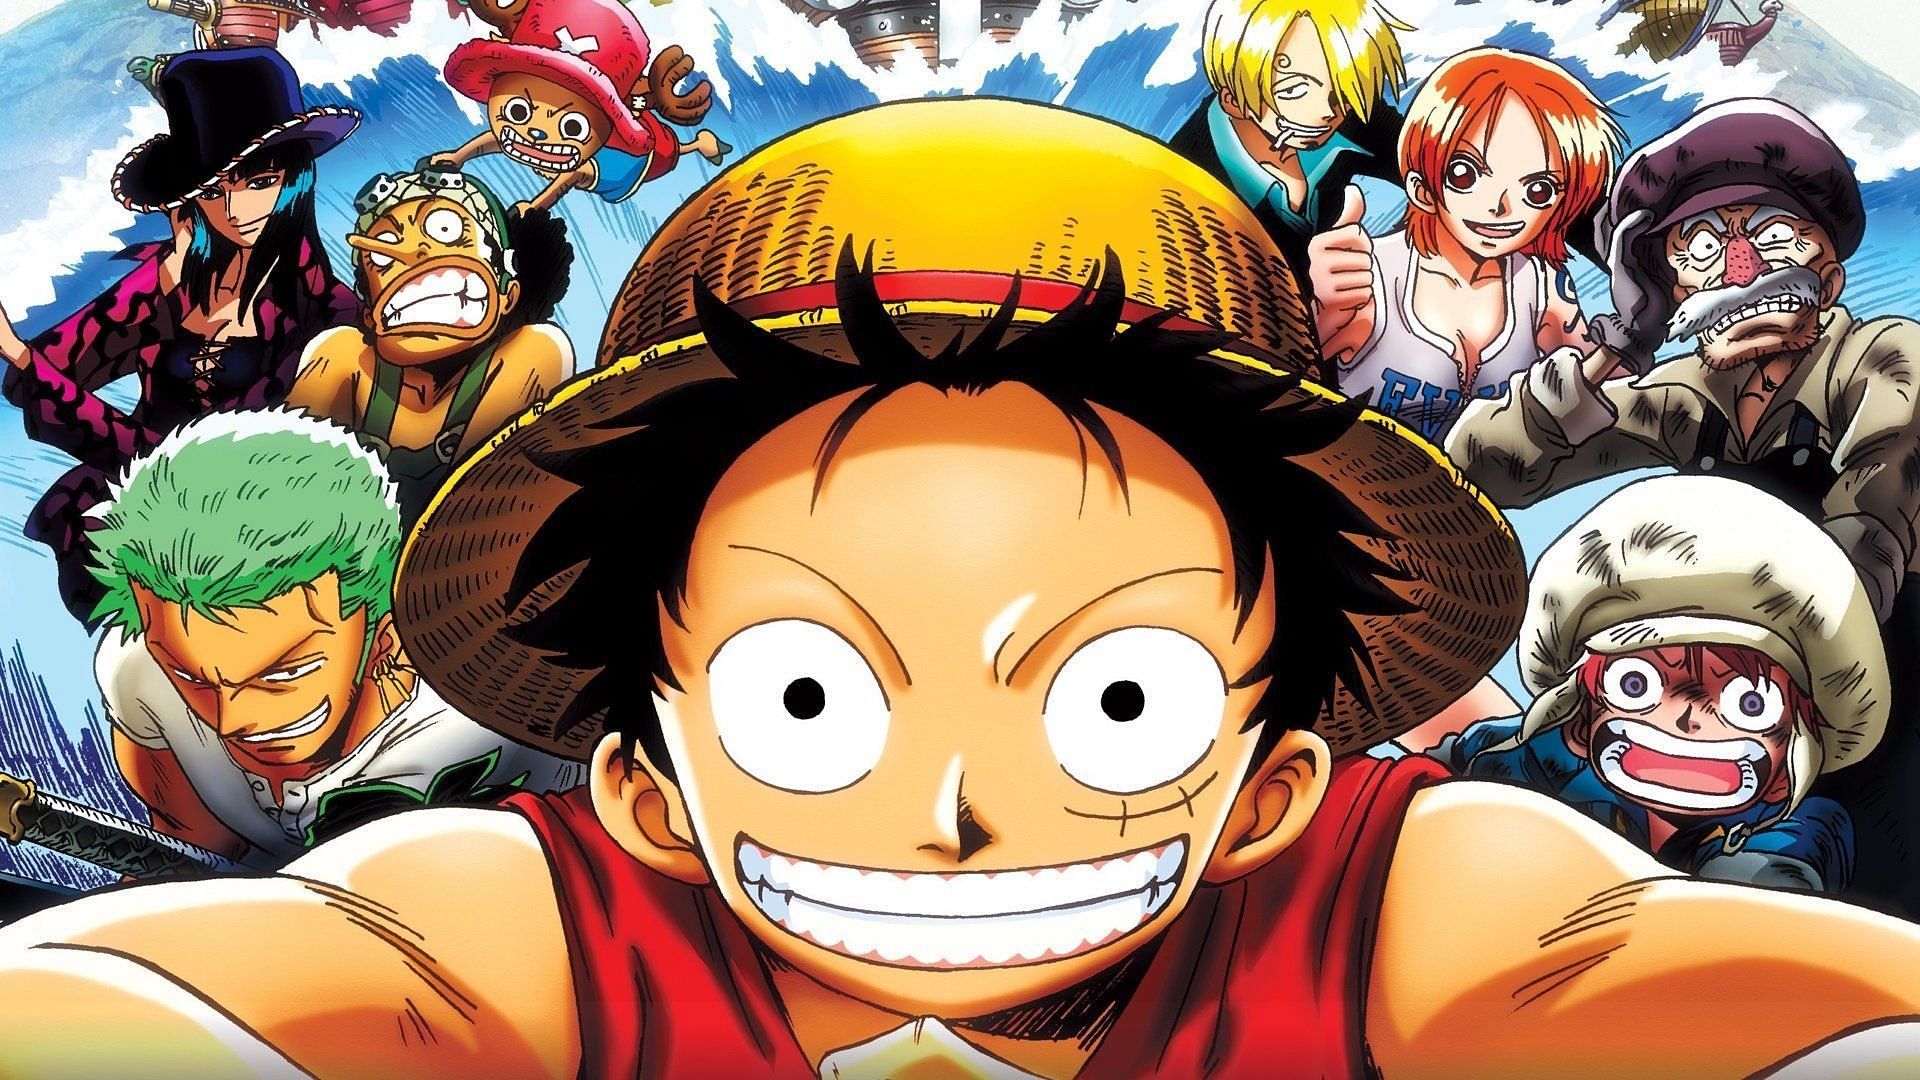 The Straw Hats as seen in Dead End Adventure (Image via Toei Animation, One Piece)